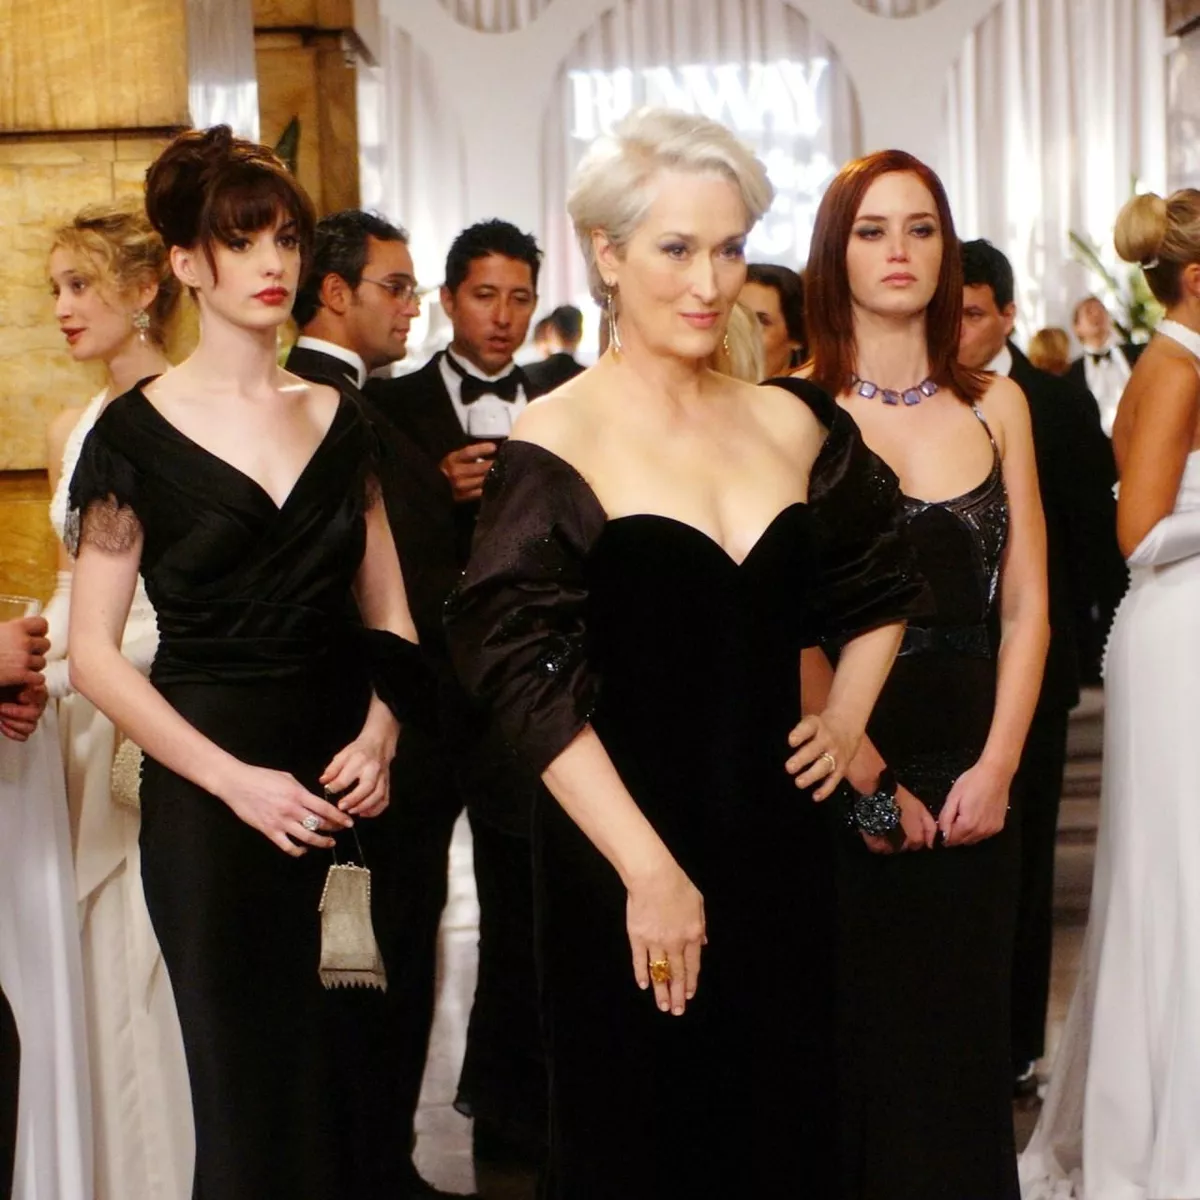 The Devil Wears Prada 2: Confirmation, Cast, Story & Everything We Know